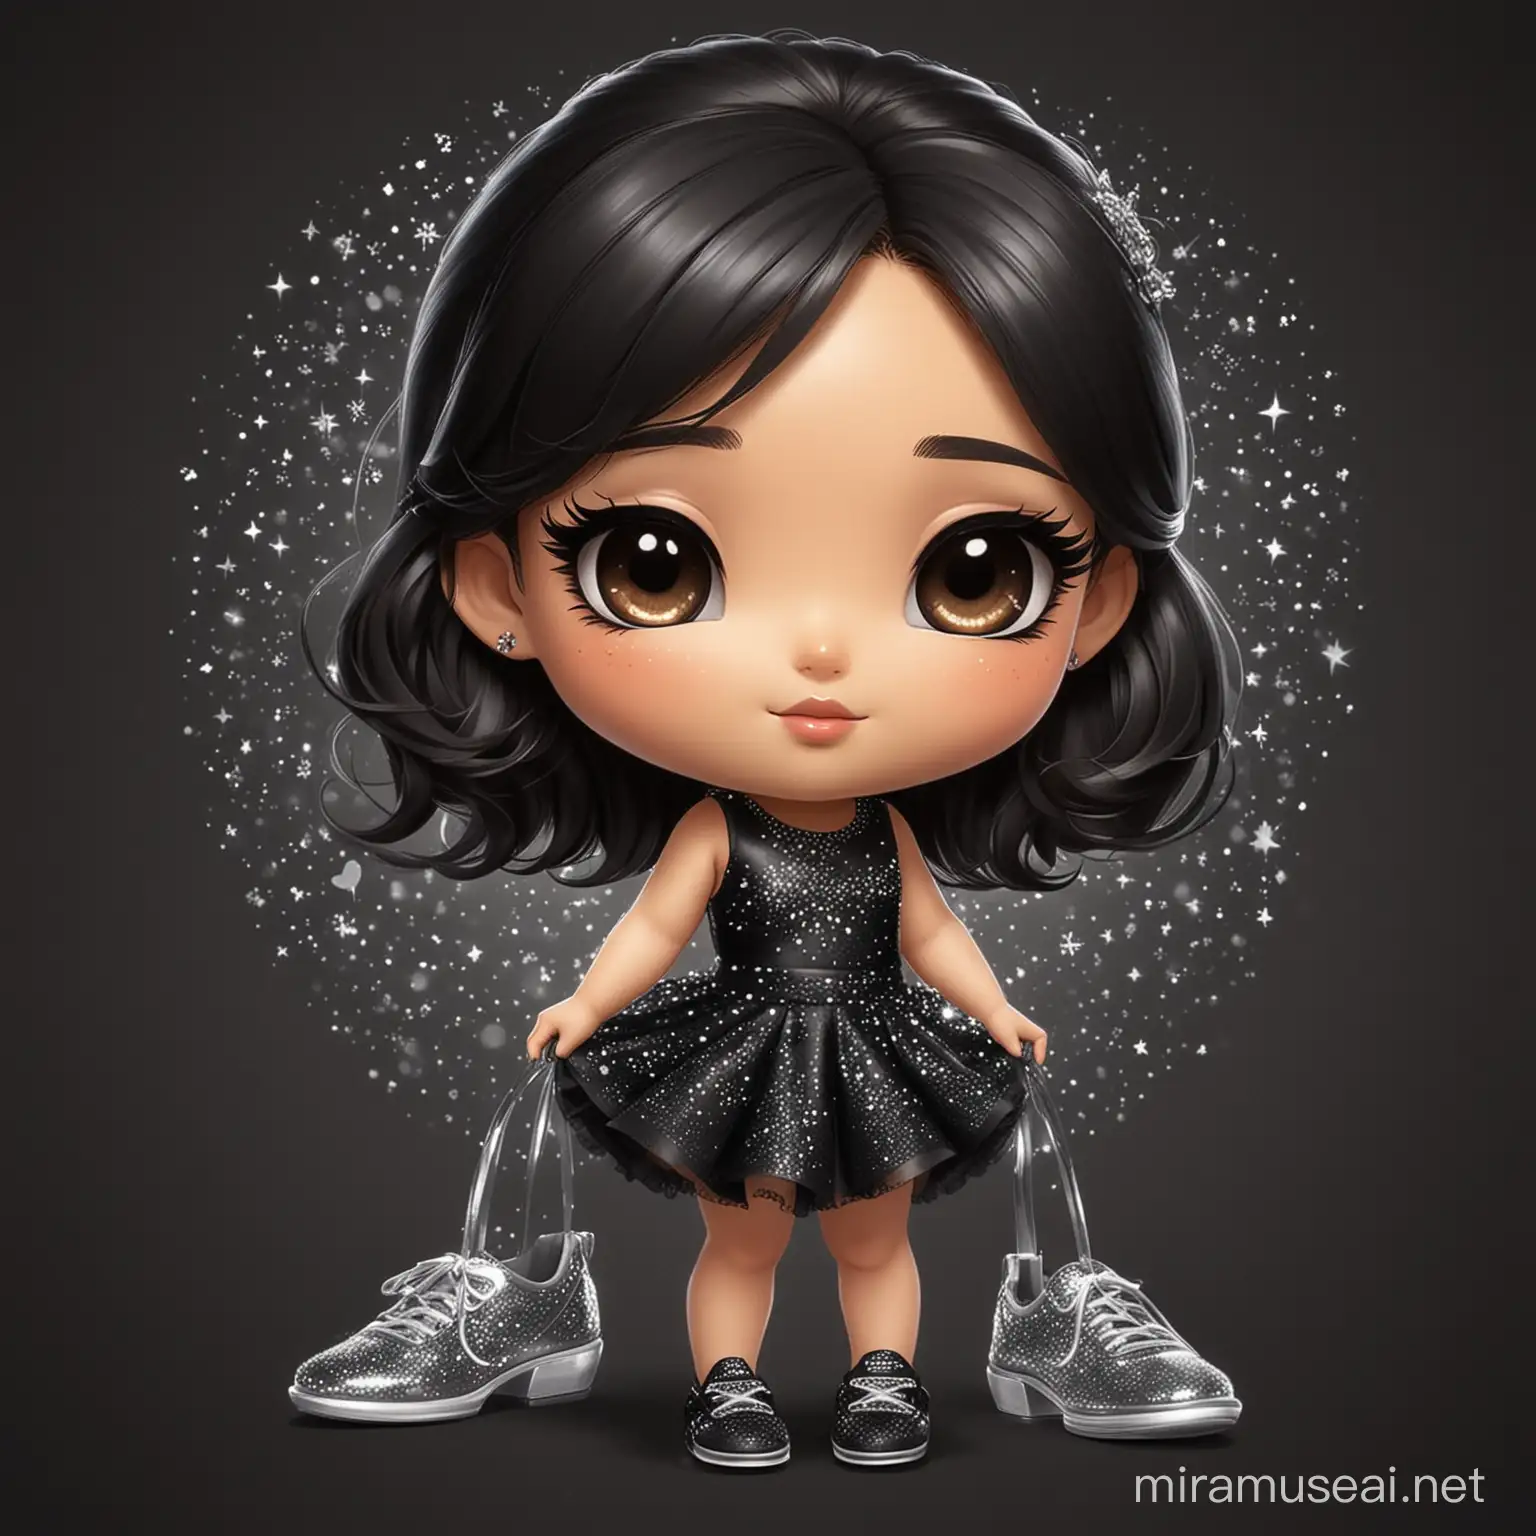 Chibi latina Girl, beautiful asian face with a glittery black background dressed in black elegant dress and silver shoes with the name of "Catalina"